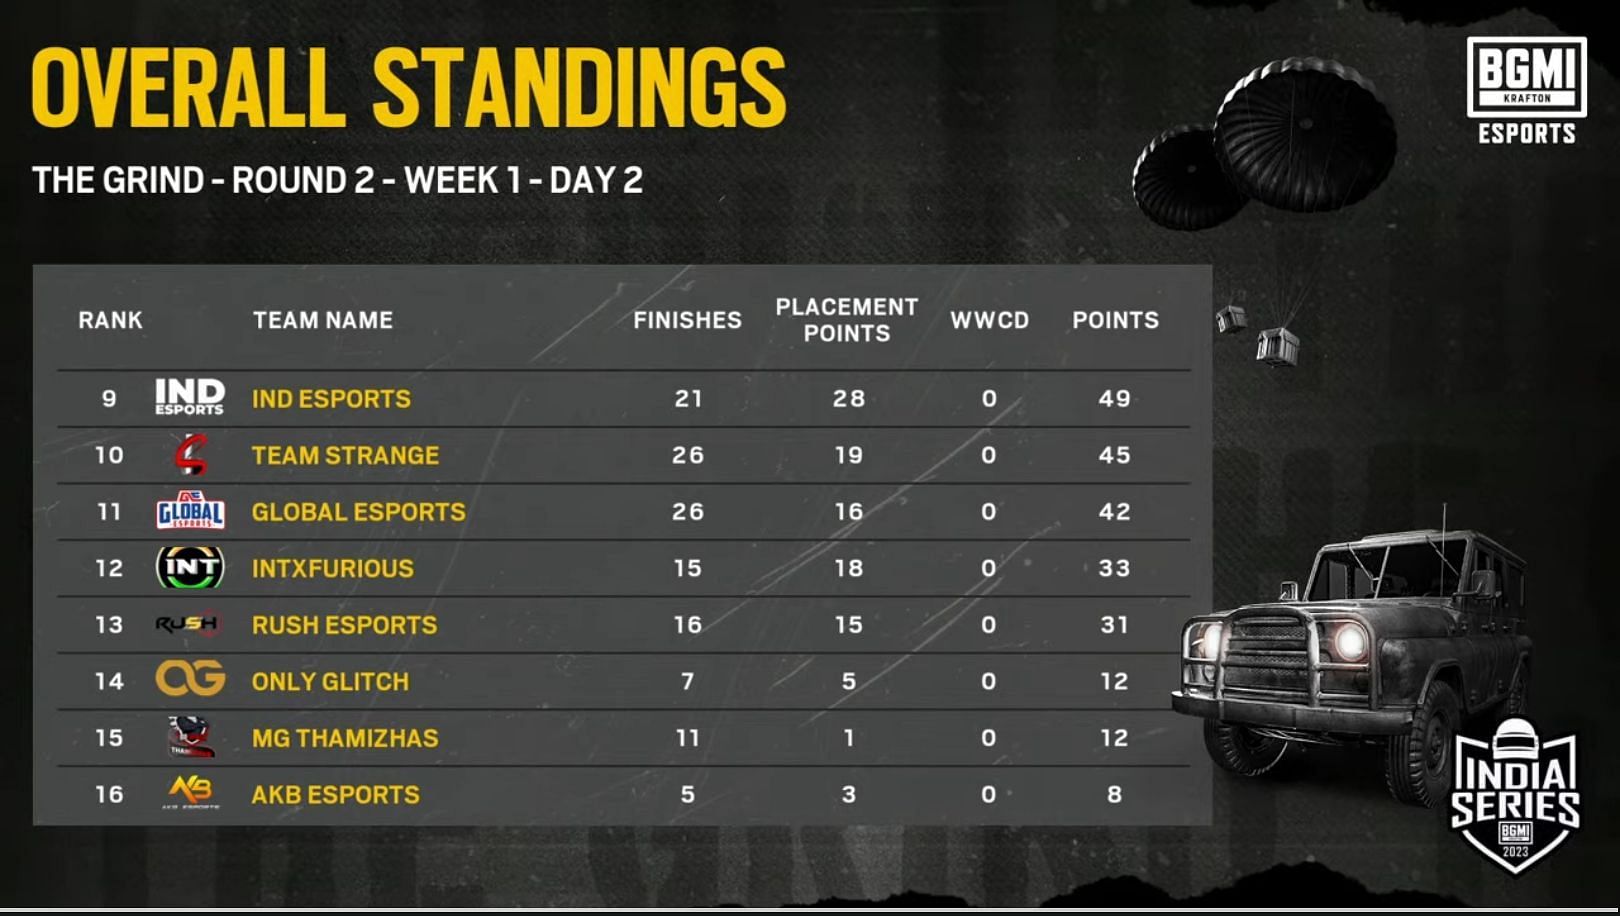 Global Esports placed 11th in The Grind Round 2 (Image via BGMI)